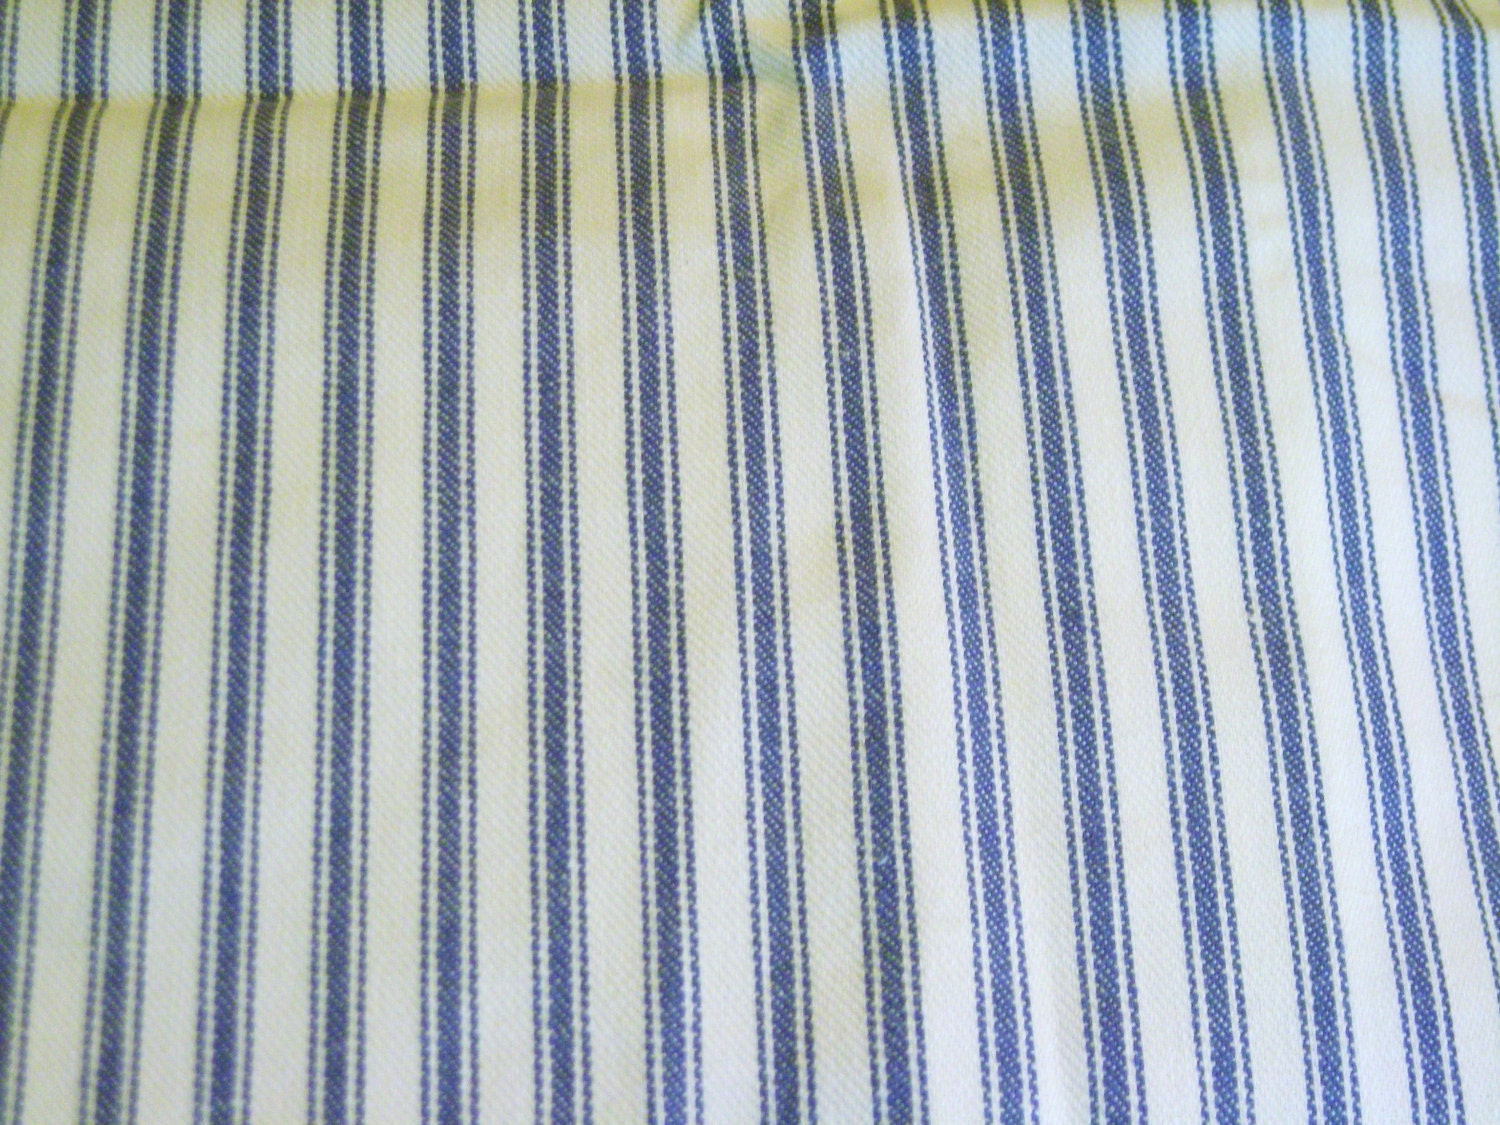 Vintage Fabric Blue and White Stripe Ticking 1 Yards